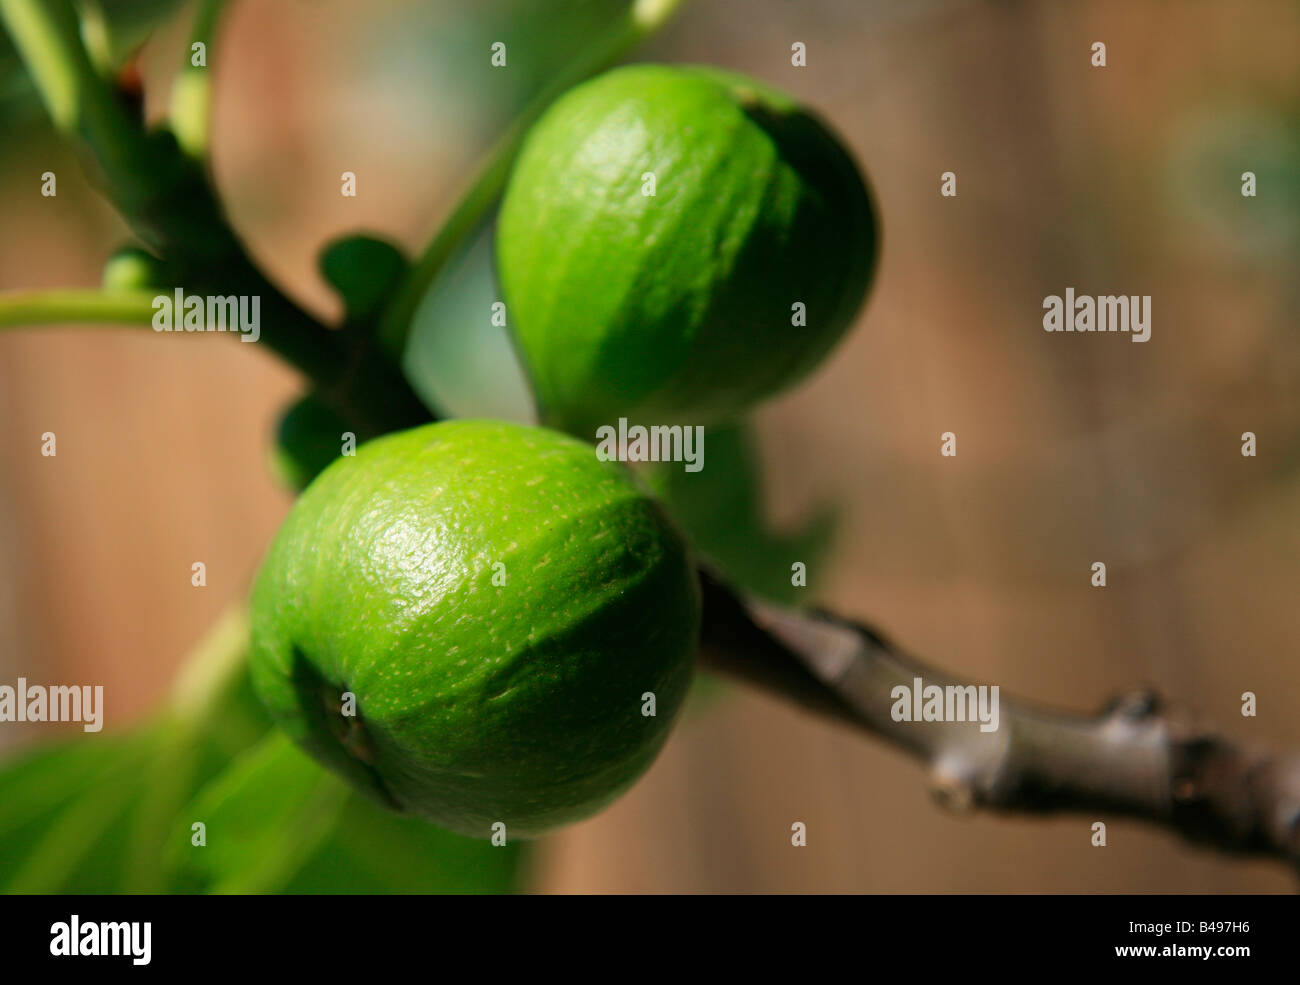 Green figs on branch Stock Photo